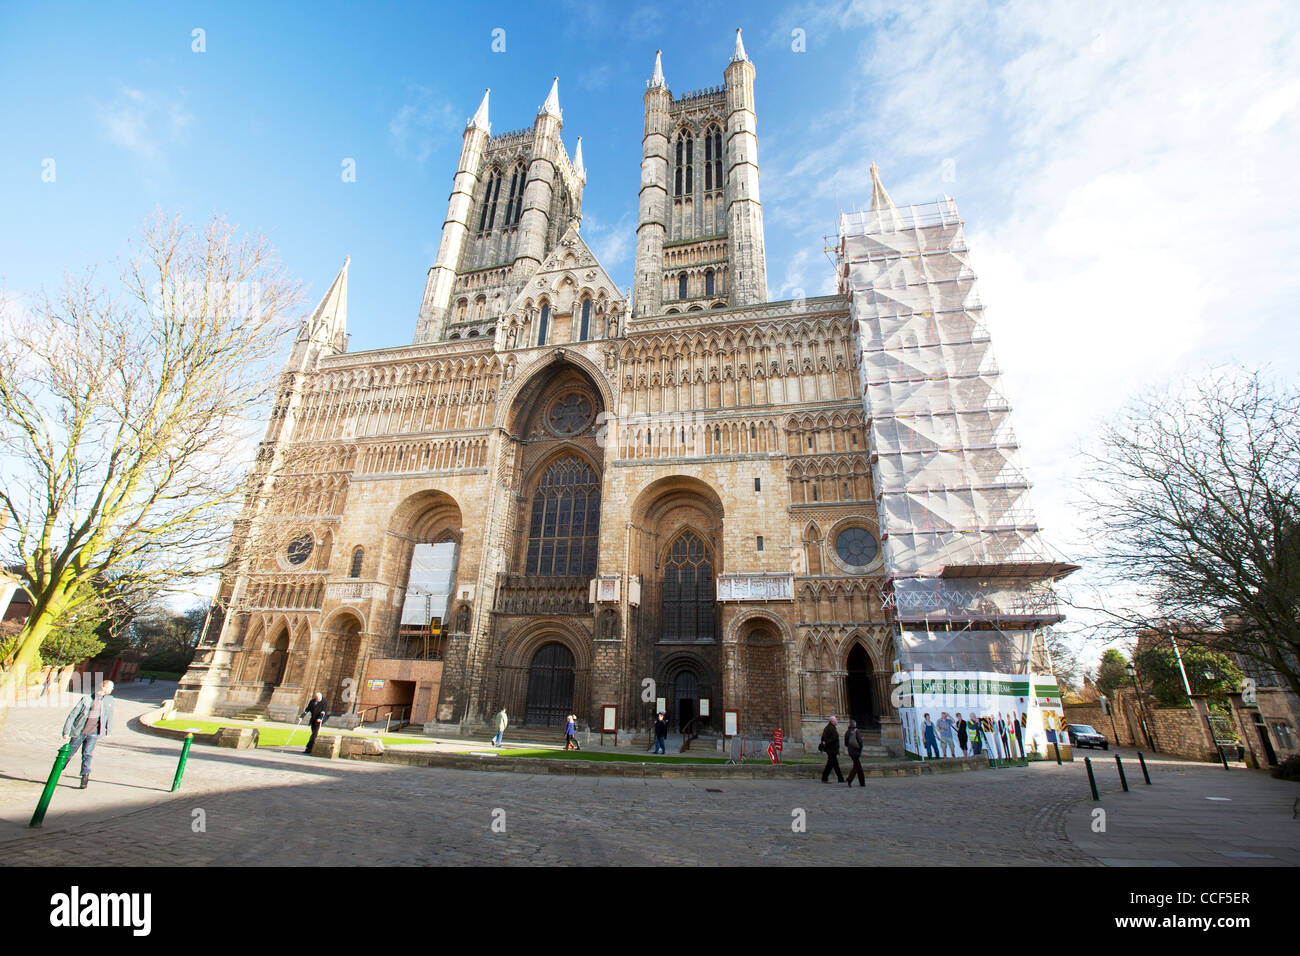 Lincoln City, Lincolnshire, England, Lincoln Cathedral Historical, Landmark gothic medieval towers restoration Stock Photo